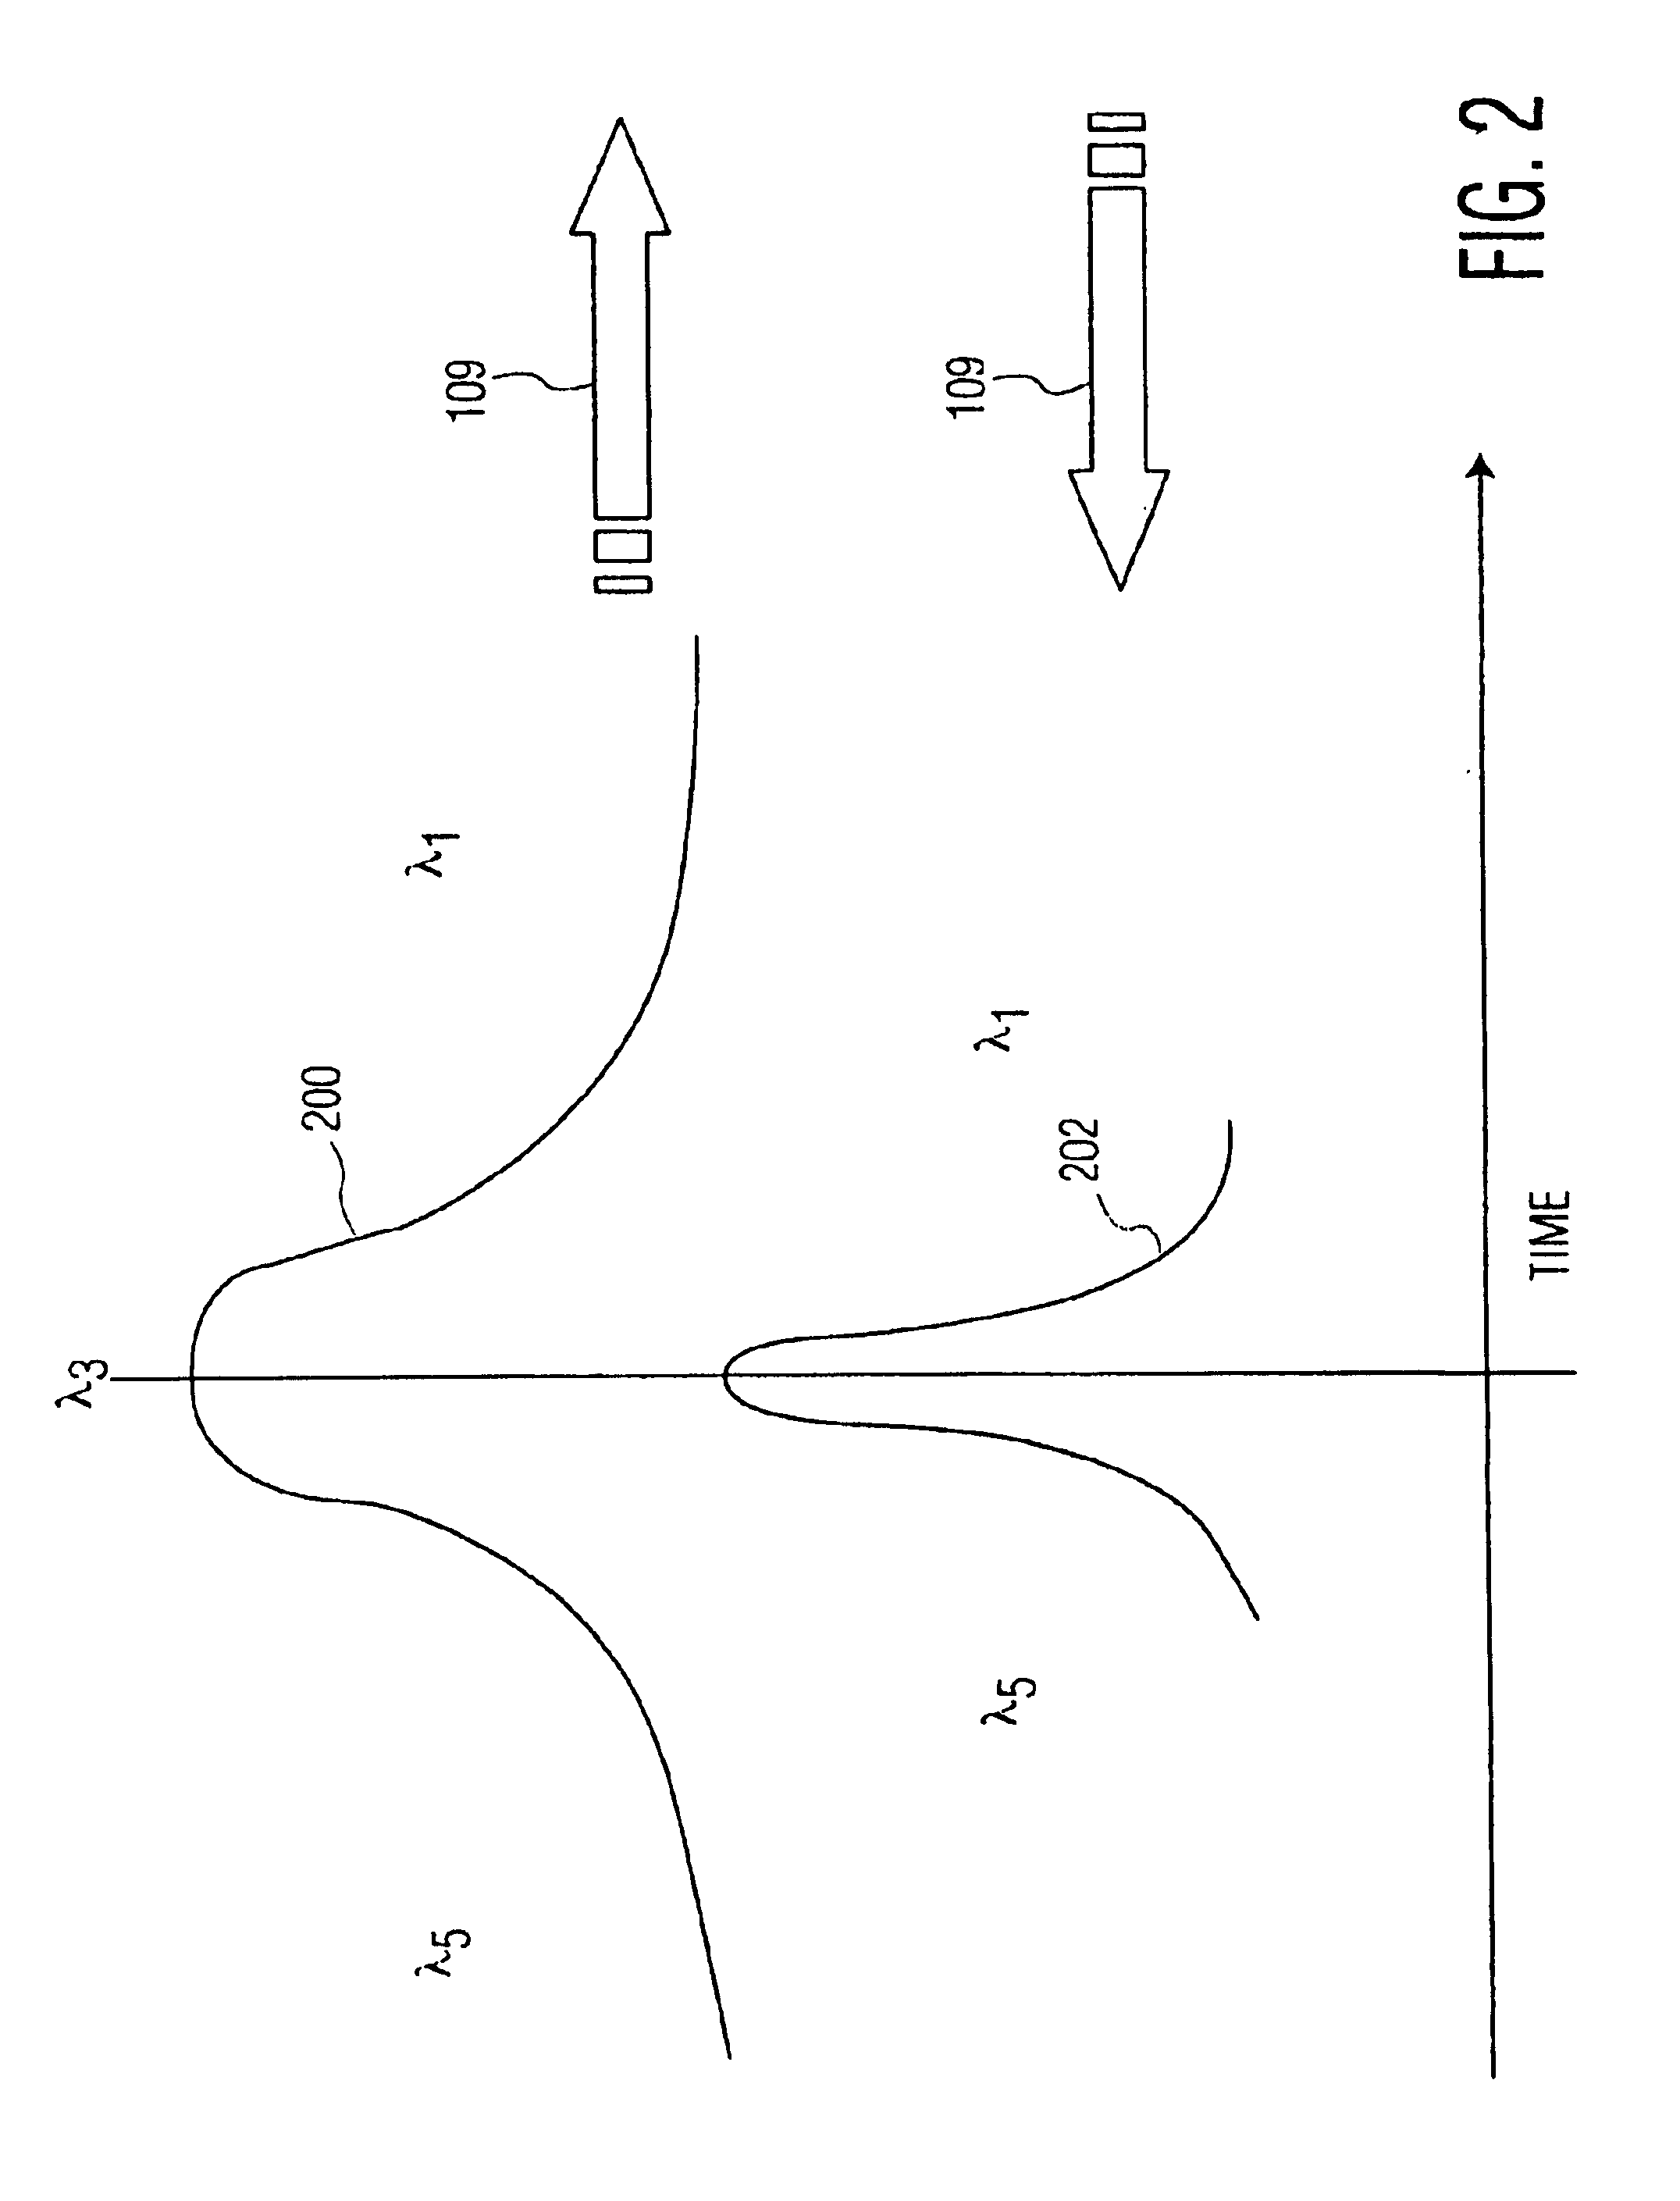 Grating dispersion compensator and method of manufacture